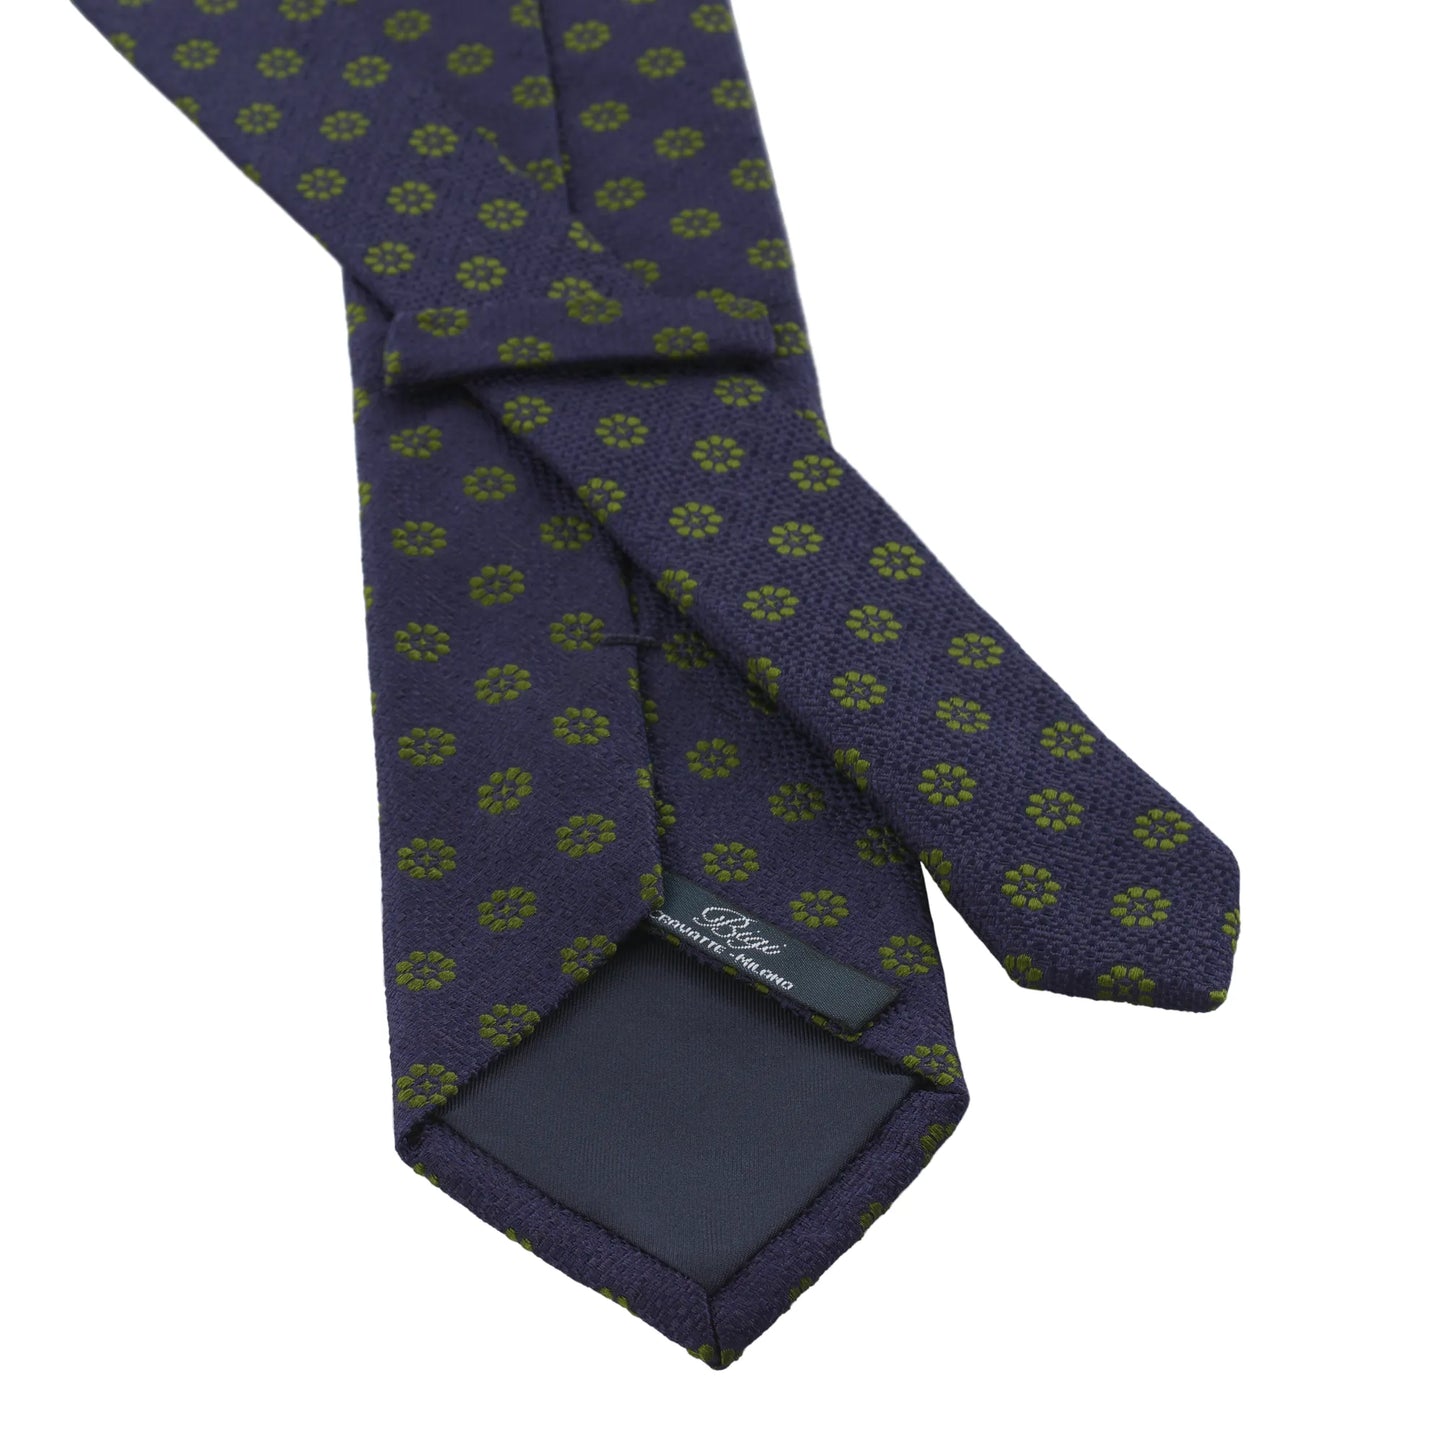 Woven Silk Blue Tie with Floral Pattern